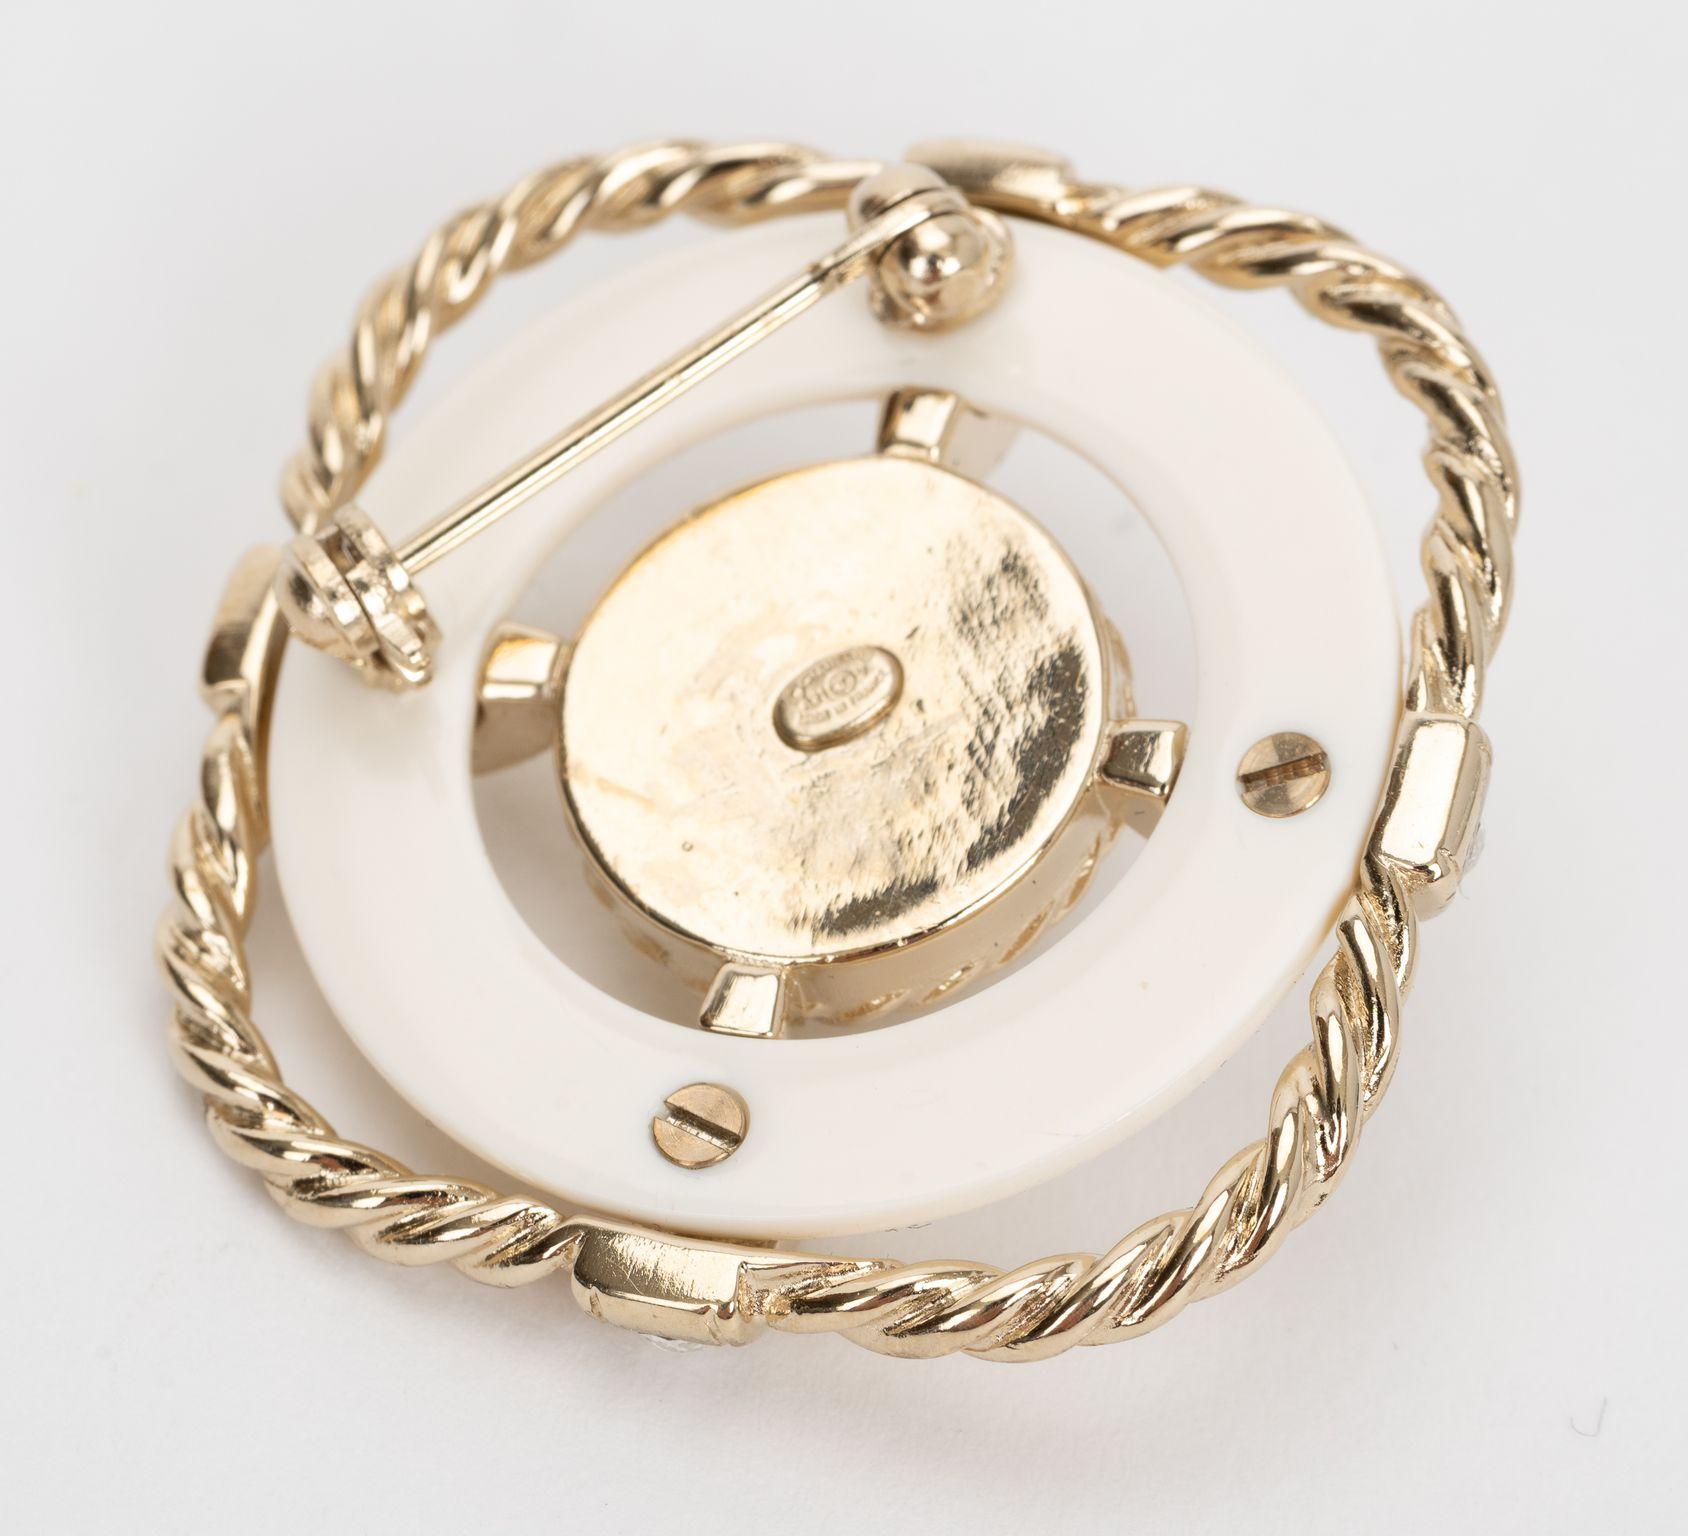 Chanel Nautical Pearl Light Gold Brooch In Excellent Condition For Sale In West Hollywood, CA